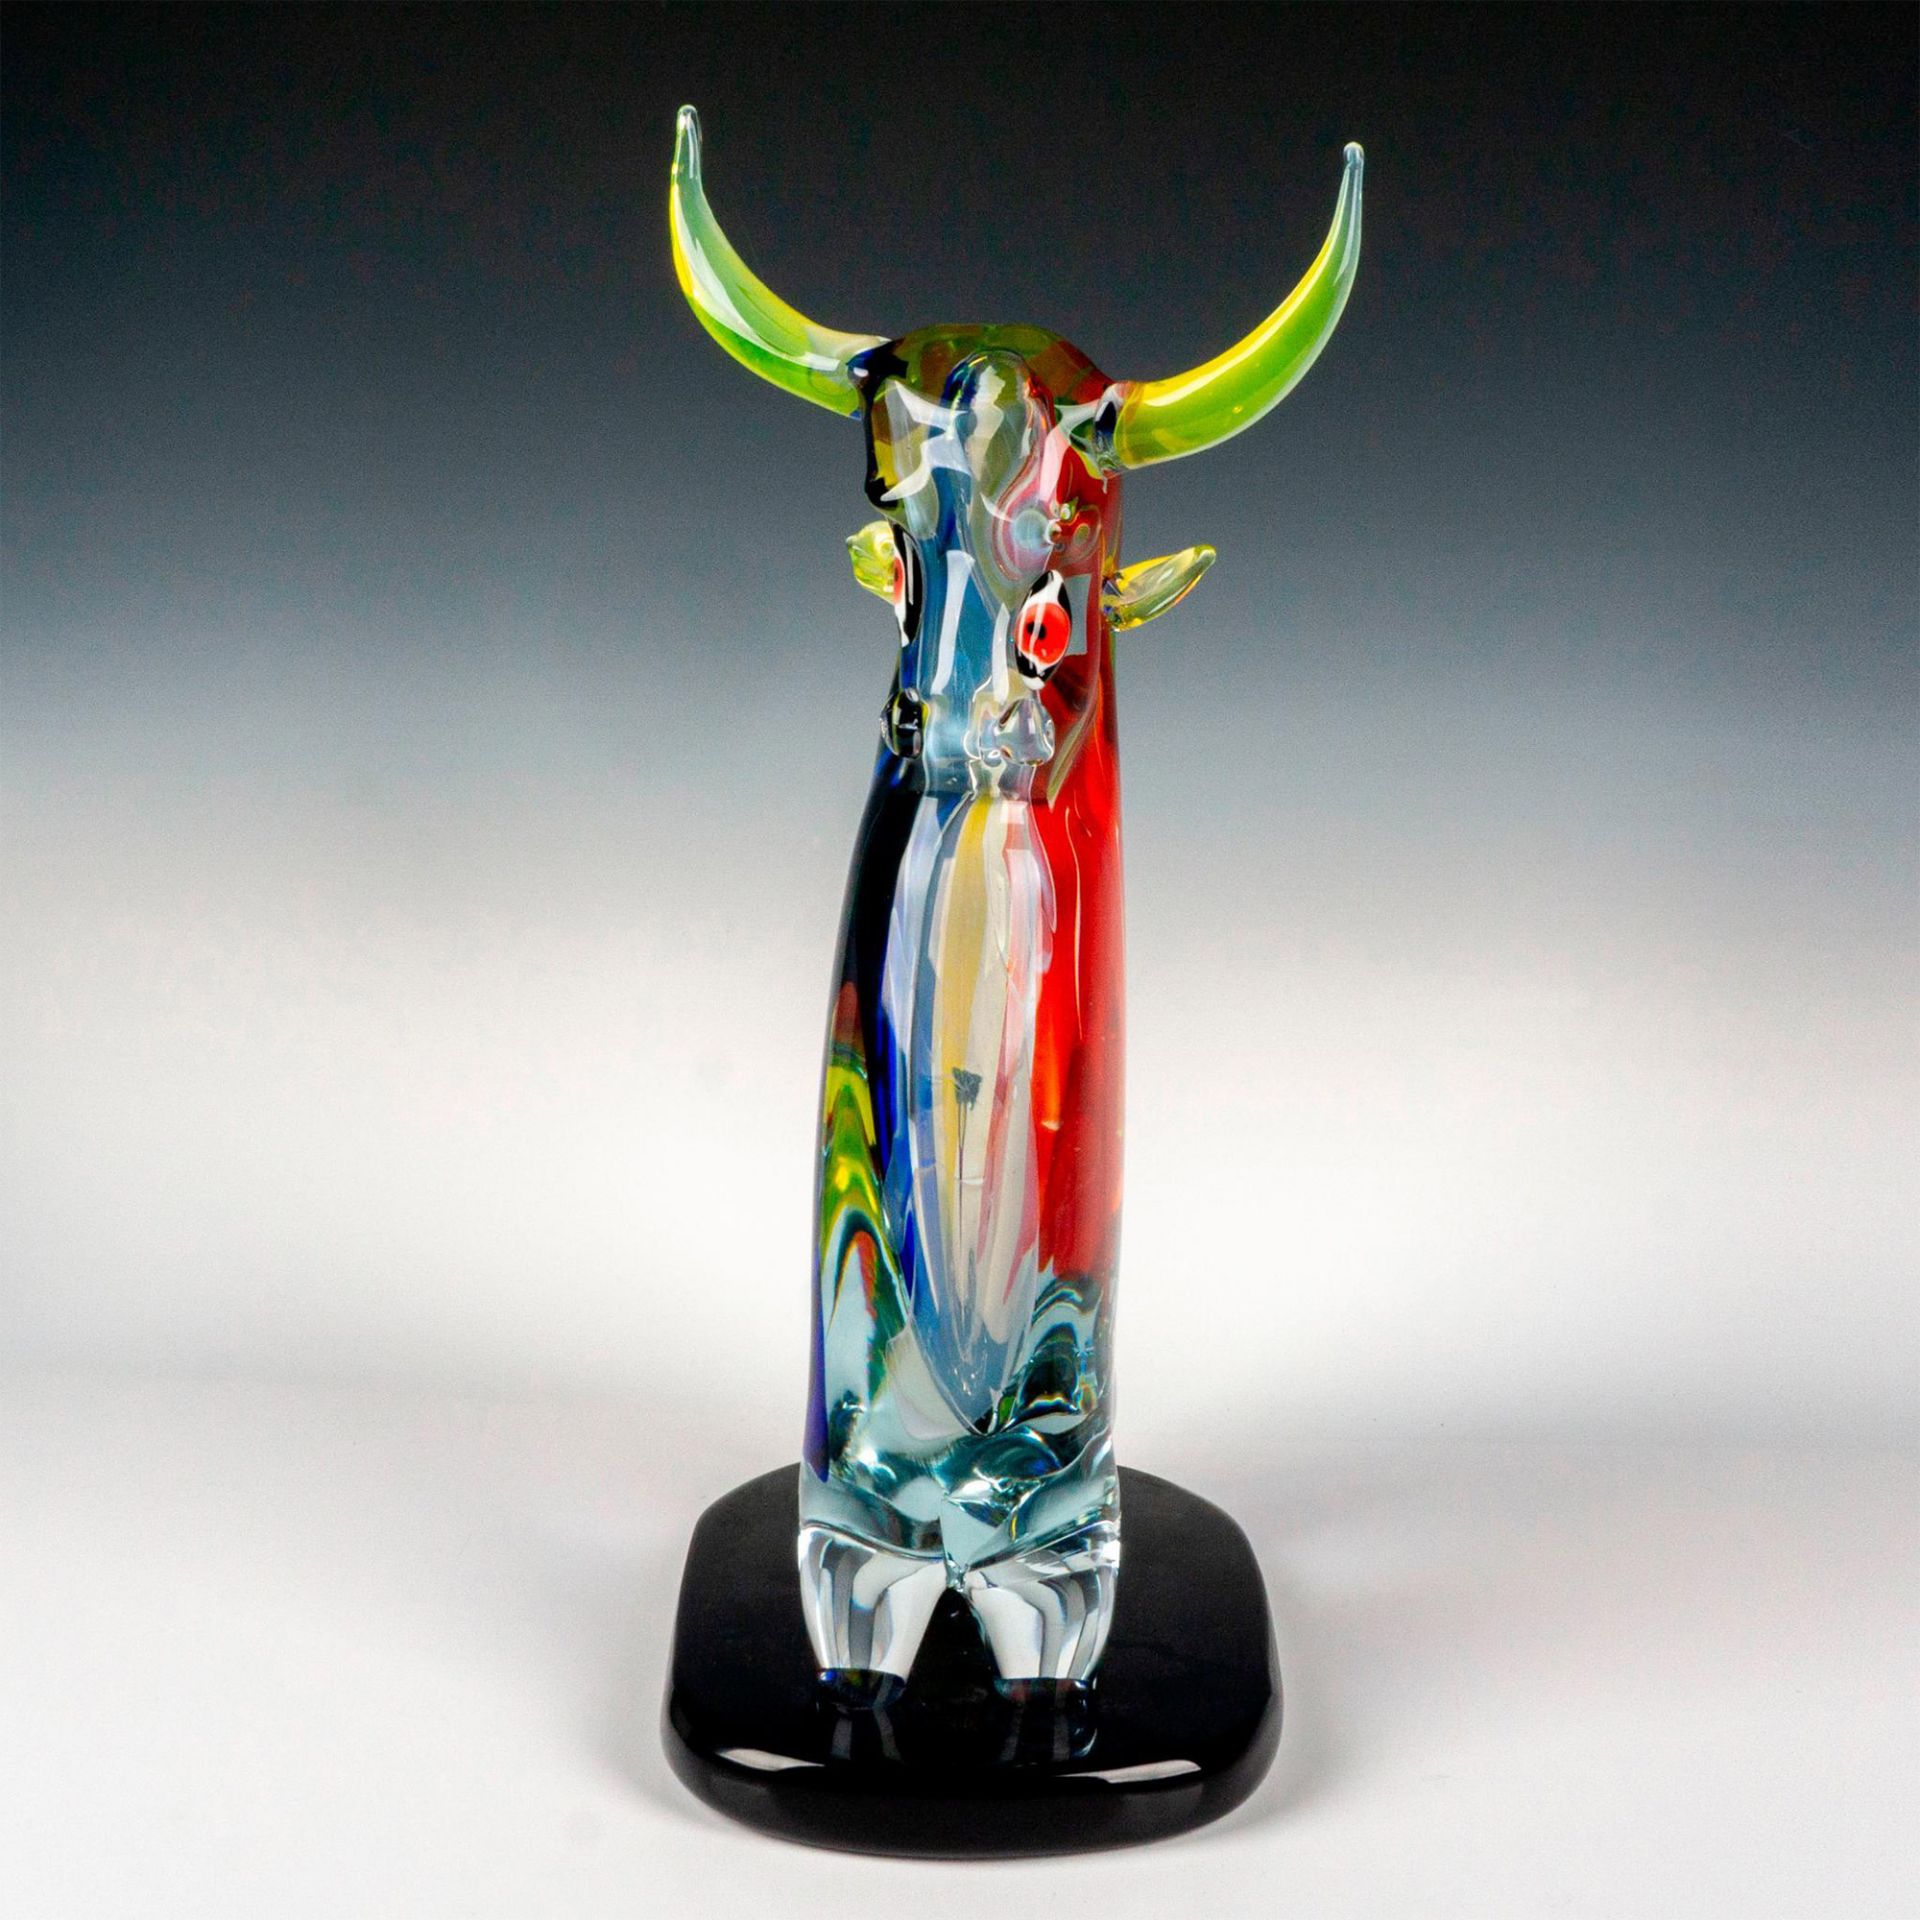 Murano Glass by Walter Furlan Sculpture, Toretto Signed - Image 3 of 8